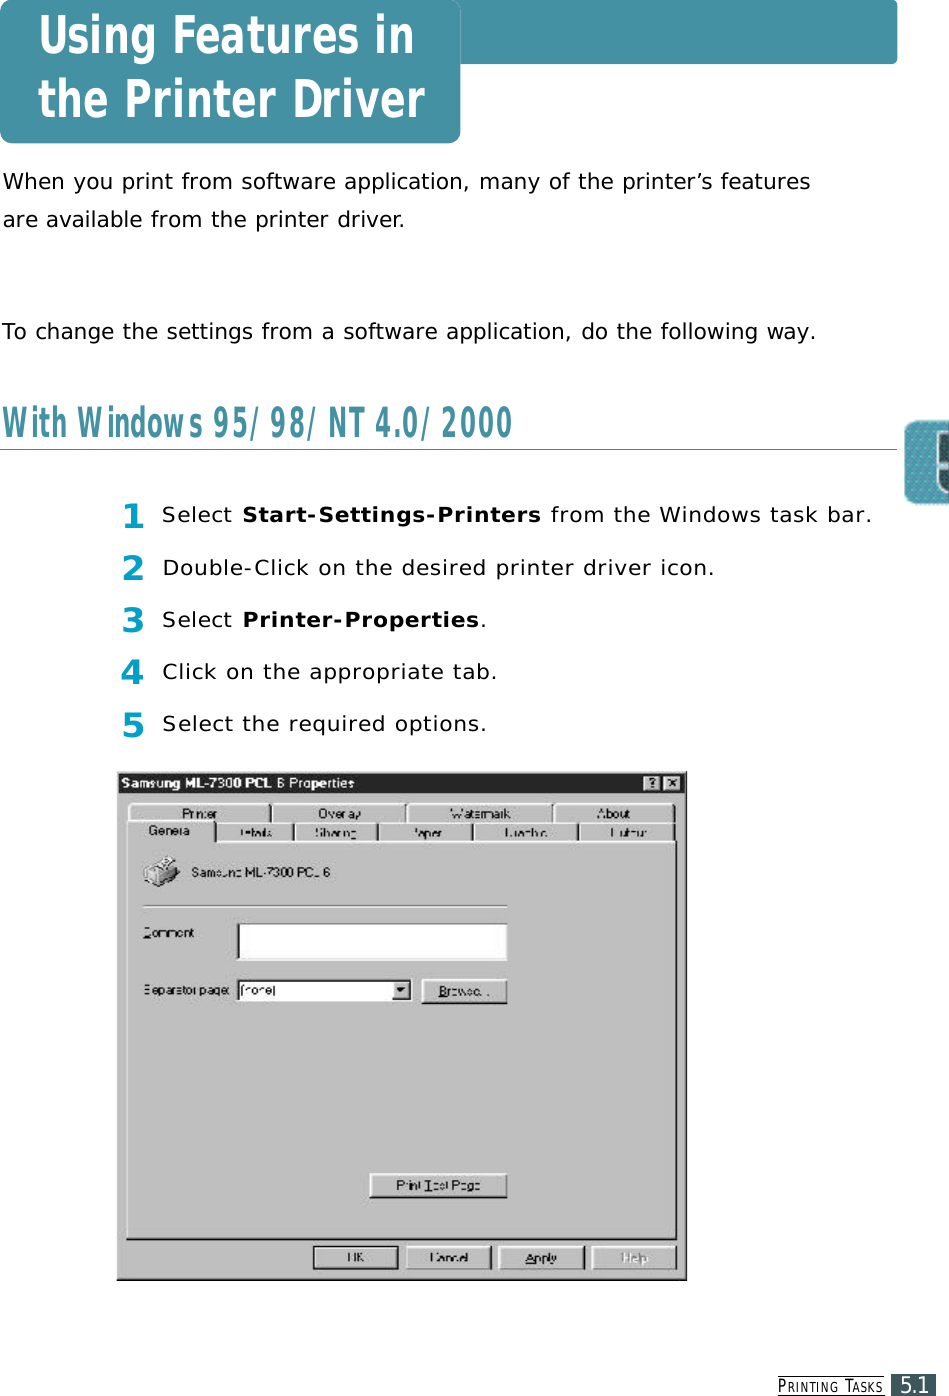 PR I N T I N G TA S K S5.1Using Features inthe Printer DriverWhen you print from software application, many of the printer’s featuresare available from the printer driver.To change the settings from a software application, do the following way.1Select S t a r t - S e t t i n g s - P r i n t e r s from the Windows task bar.2Double-Click on the desired printer driver icon.3Select P r i n t e r - P r o p e r t i e s .4Click on the appropriate tab.5Select the required options.With Windows 95/98/NT 4.0/2000